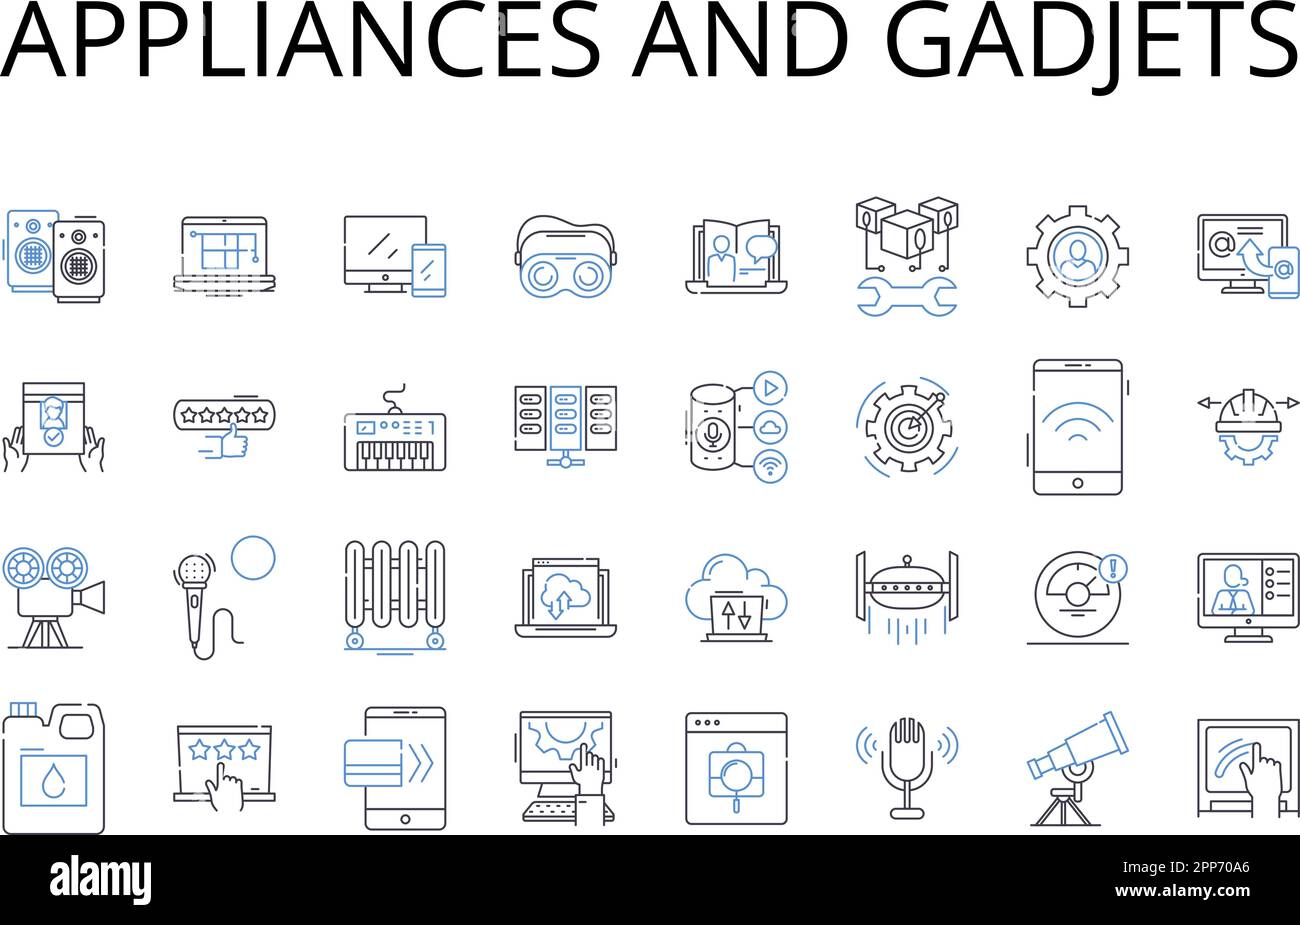 Appliances and gadjets line icons collection. Devices, Machines, Technology, Tools, Equipment, Gadgets, Utilities vector and linear illustration Stock Vector